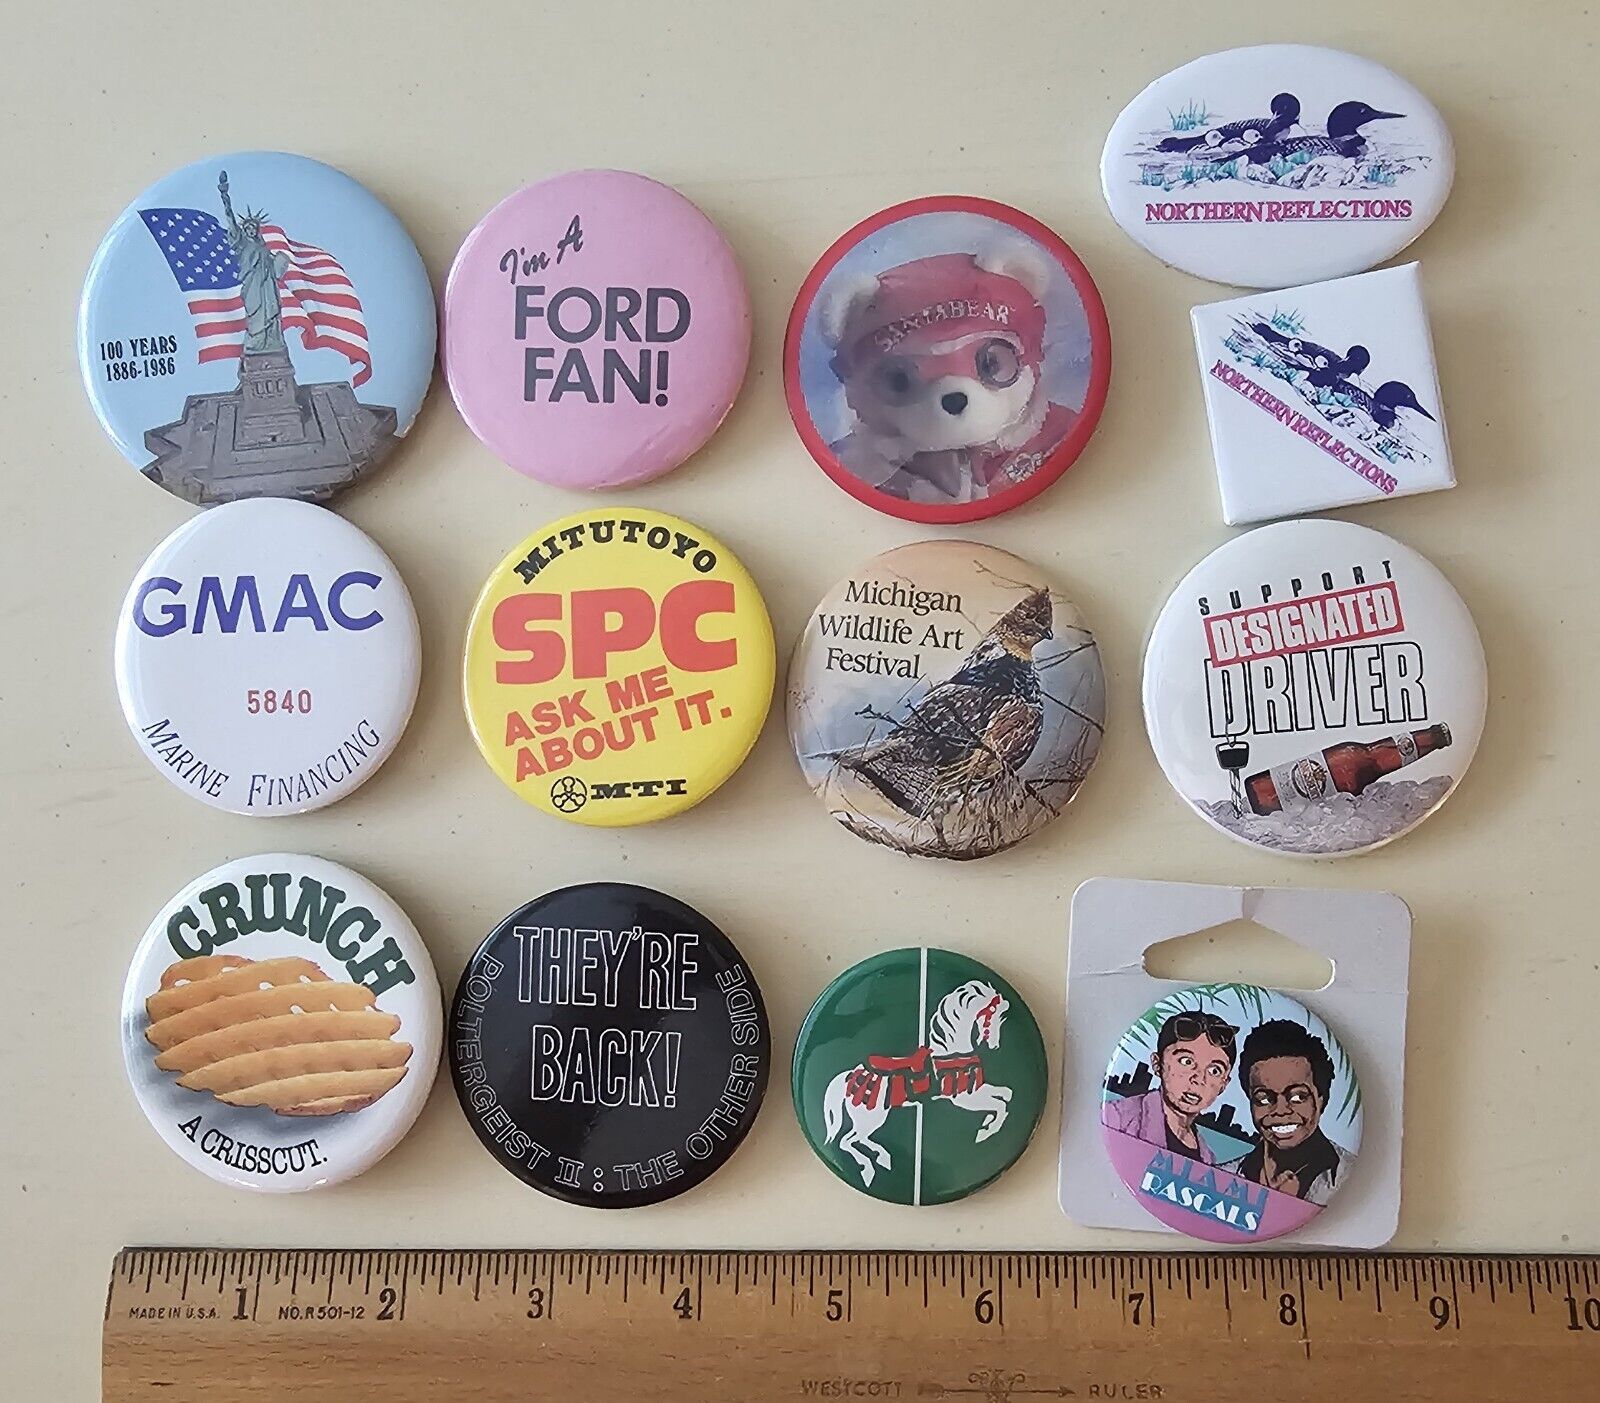 Vintage 1980's various pin back buttons - add some flare